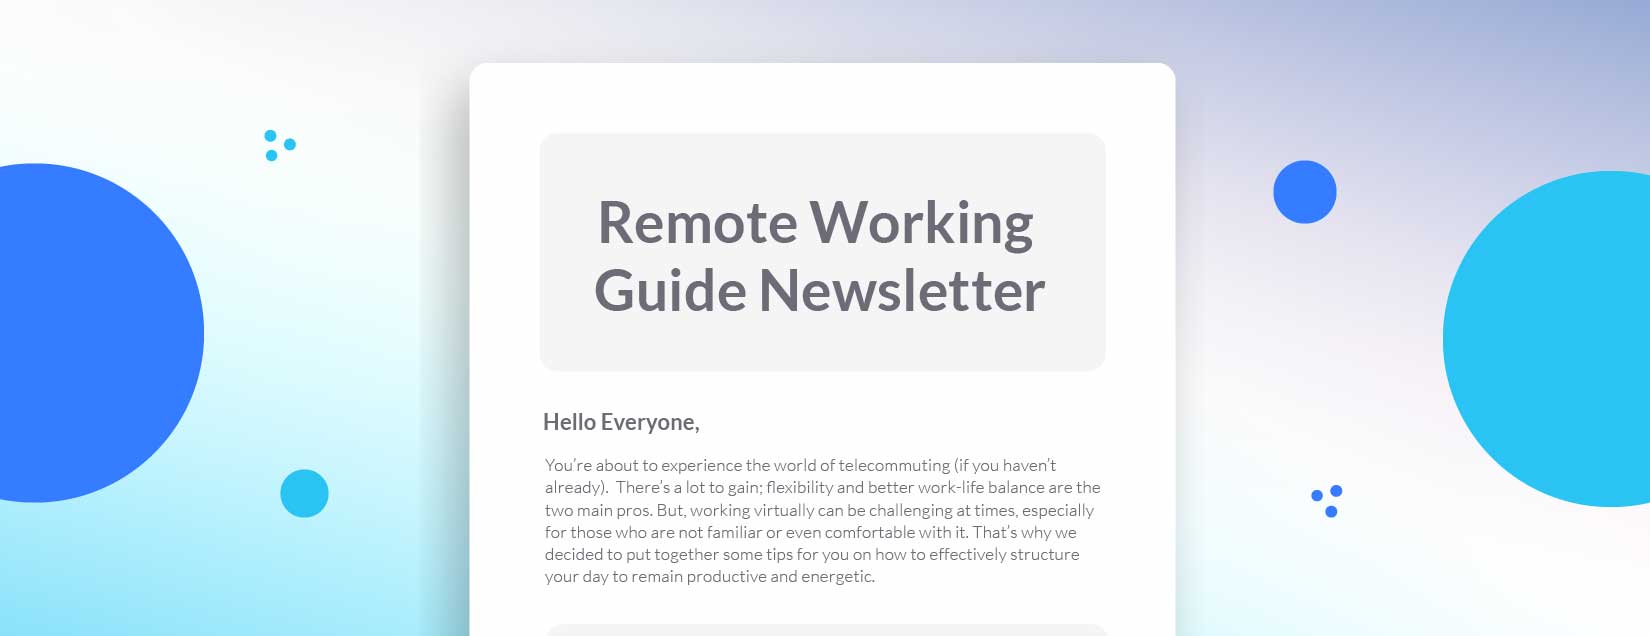 Copywriting Services For Every Need EmailNewsletters